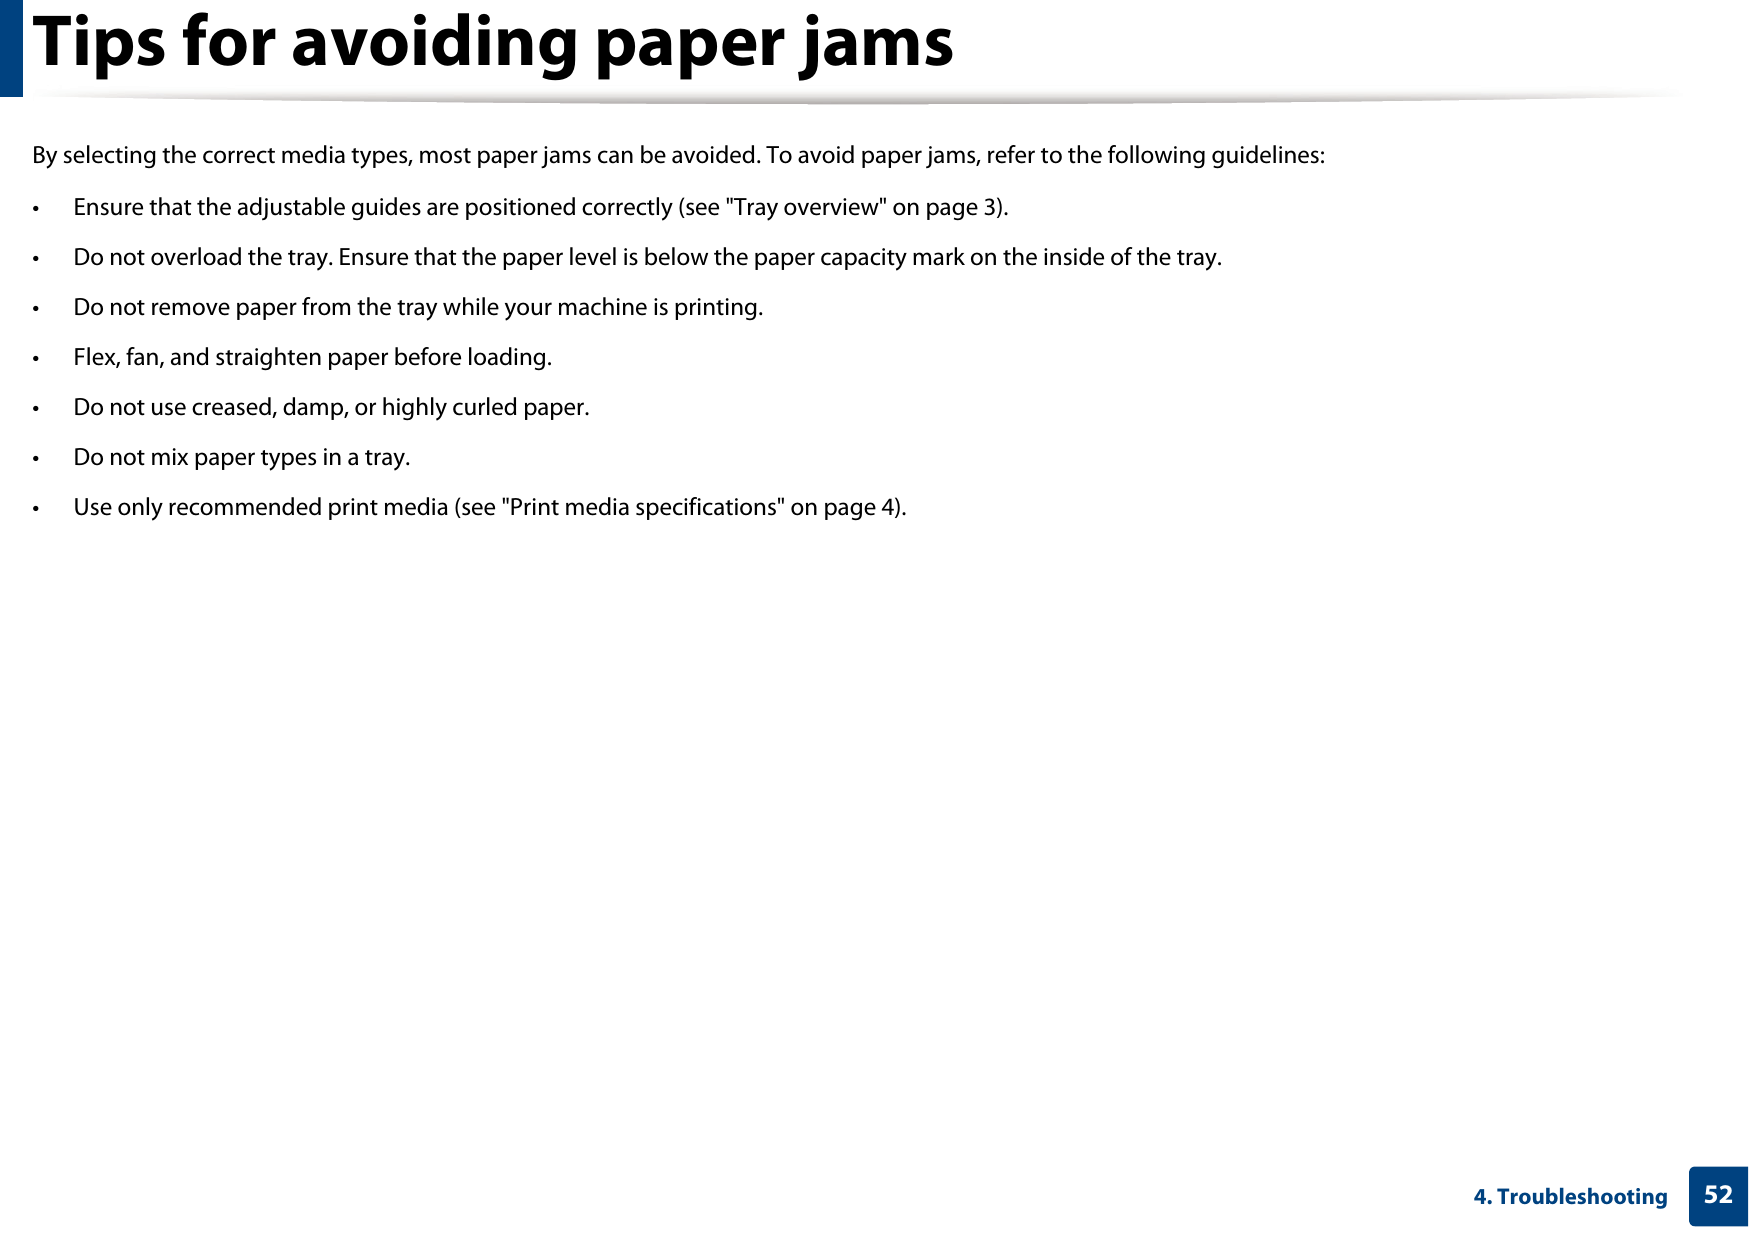 524. TroubleshootingTips for avoiding paper jamsBy selecting the correct media types, most paper jams can be avoided. To avoid paper jams, refer to the following guidelines:• Ensure that the adjustable guides are positioned correctly (see &quot;Tray overview&quot; on page 3).• Do not overload the tray. Ensure that the paper level is below the paper capacity mark on the inside of the tray.• Do not remove paper from the tray while your machine is printing.• Flex, fan, and straighten paper before loading. • Do not use creased, damp, or highly curled paper.• Do not mix paper types in a tray.• Use only recommended print media (see &quot;Print media specifications&quot; on page 4).